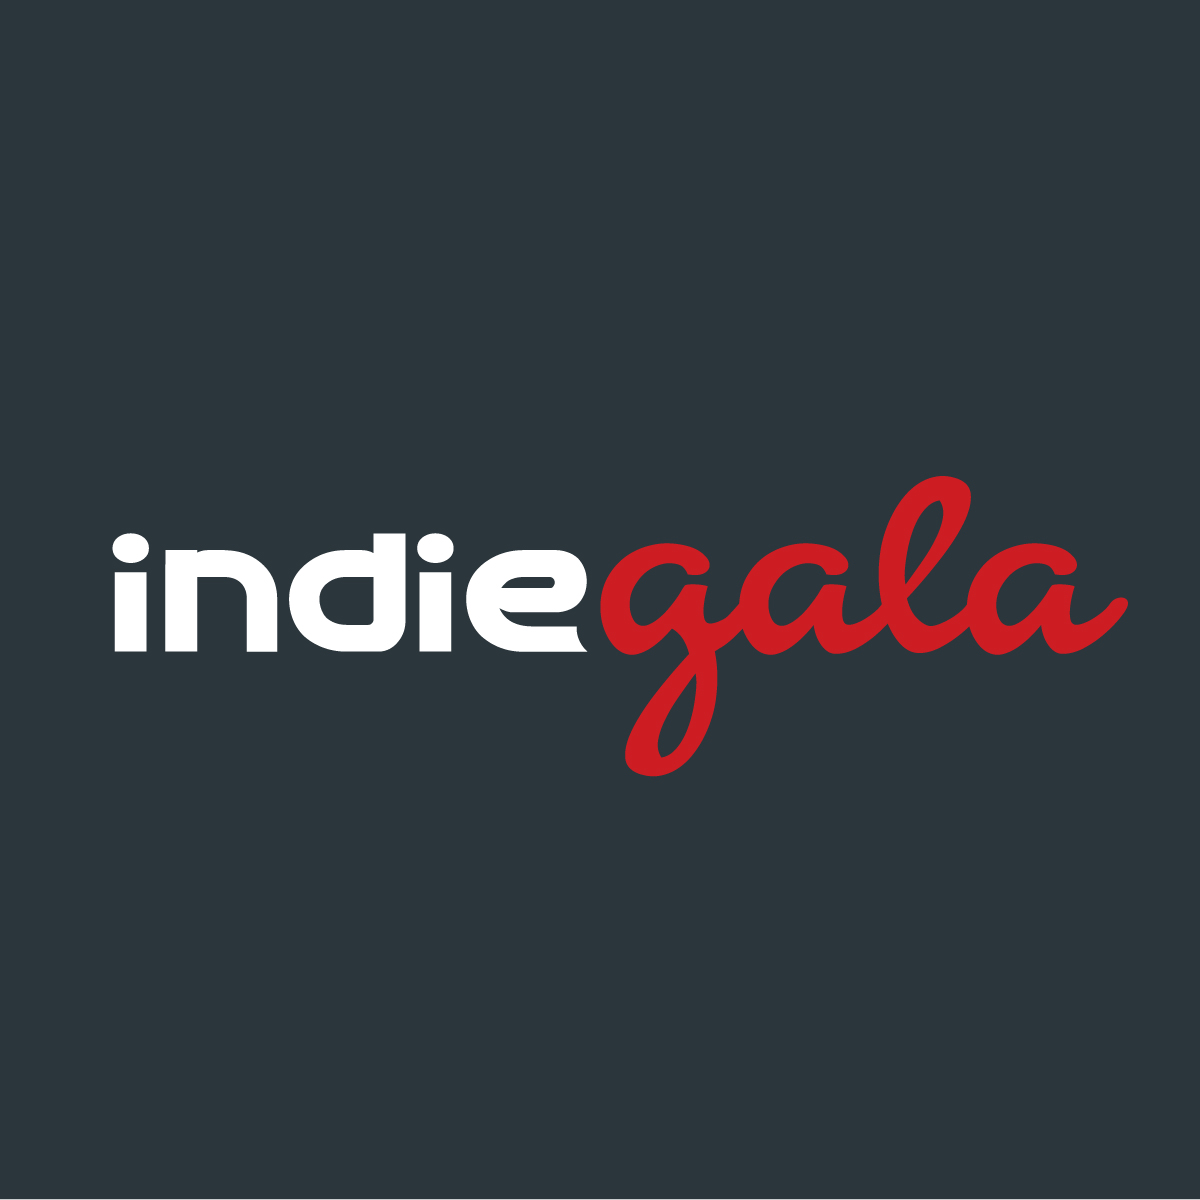 IndieGala: Where Gaming Meets Savings and Community